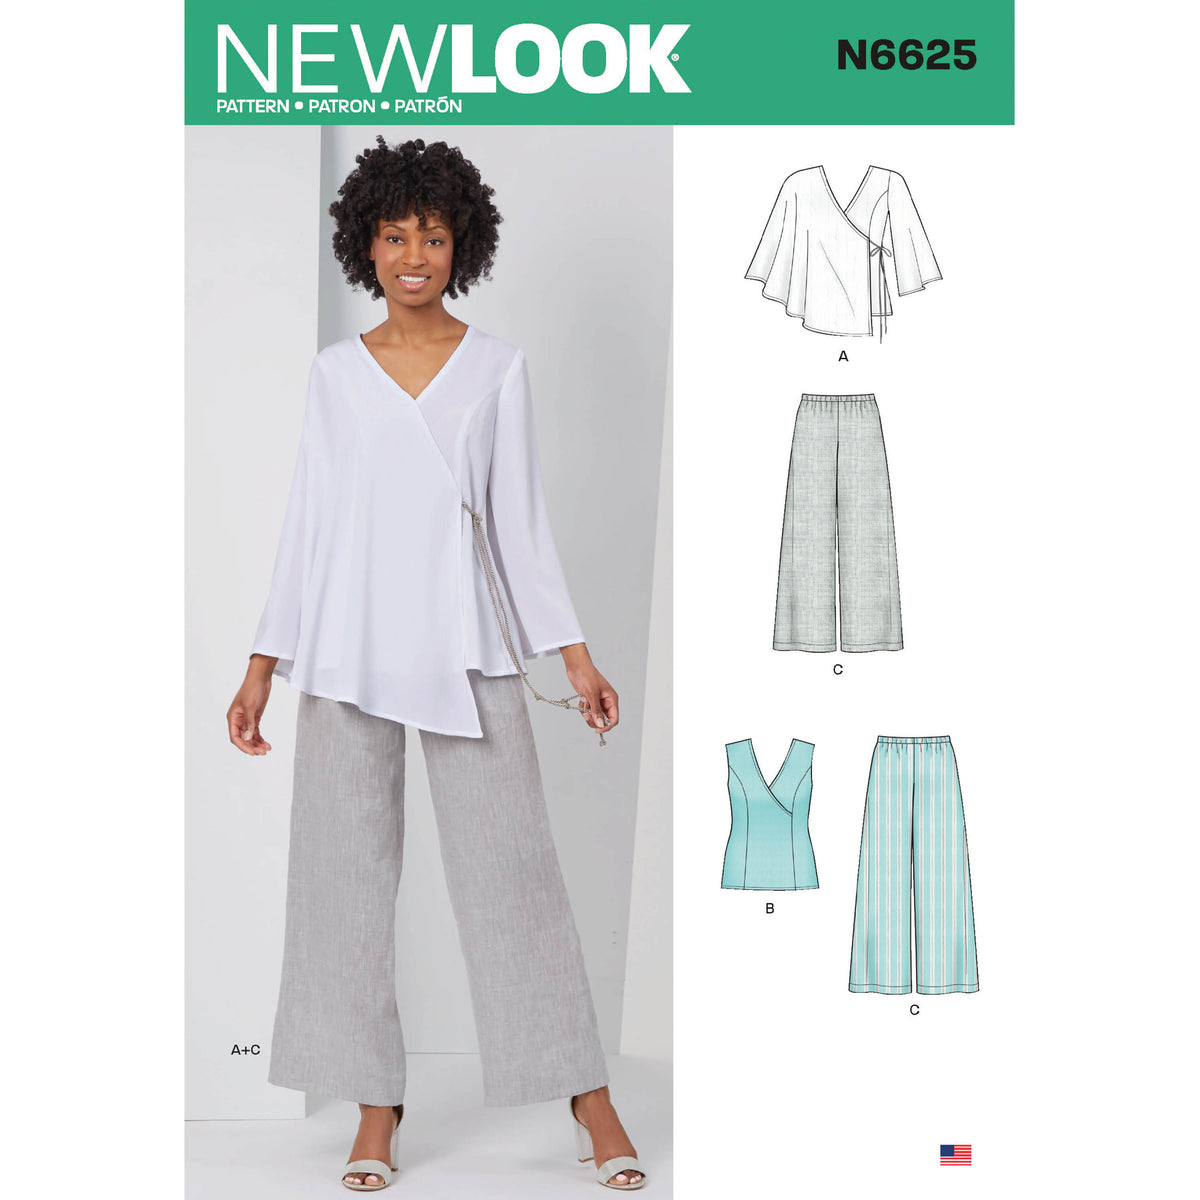 6625 New Look Sewing Pattern N6625 Misses' Tops And Pull On Pants